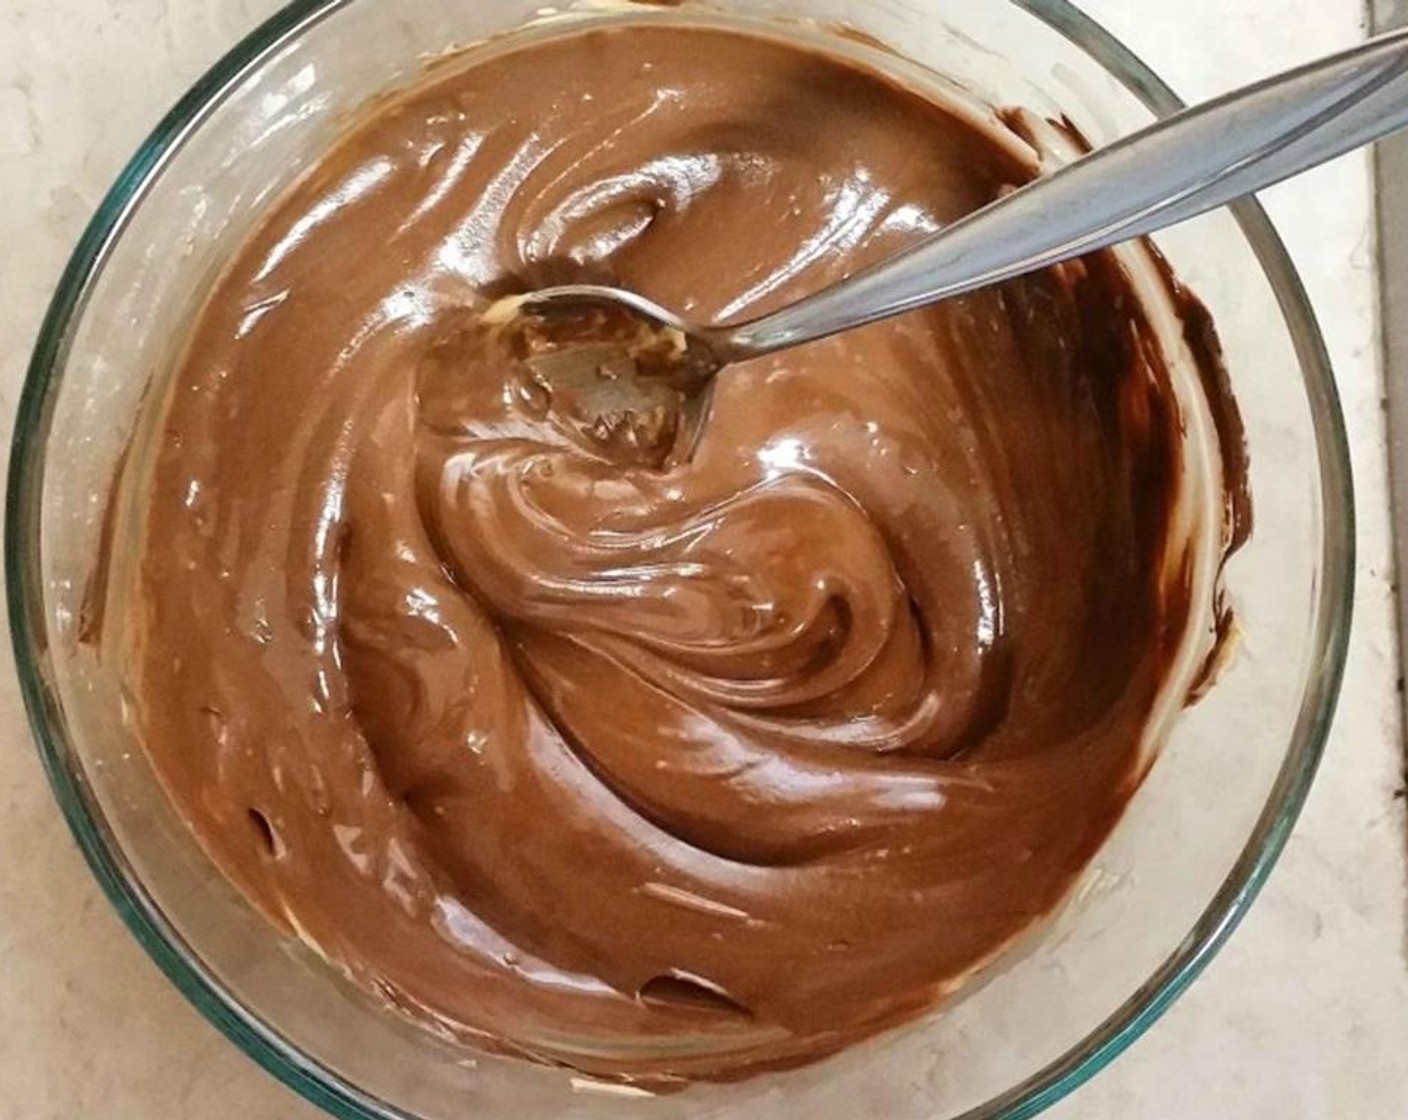 step 4 In the microwave, melt Chocolate Chips (1 1/2 cups) by microwaving for 30 seconds and stirring. When chips are melted, add Sweetened Condensed Milk (2/3 cup).